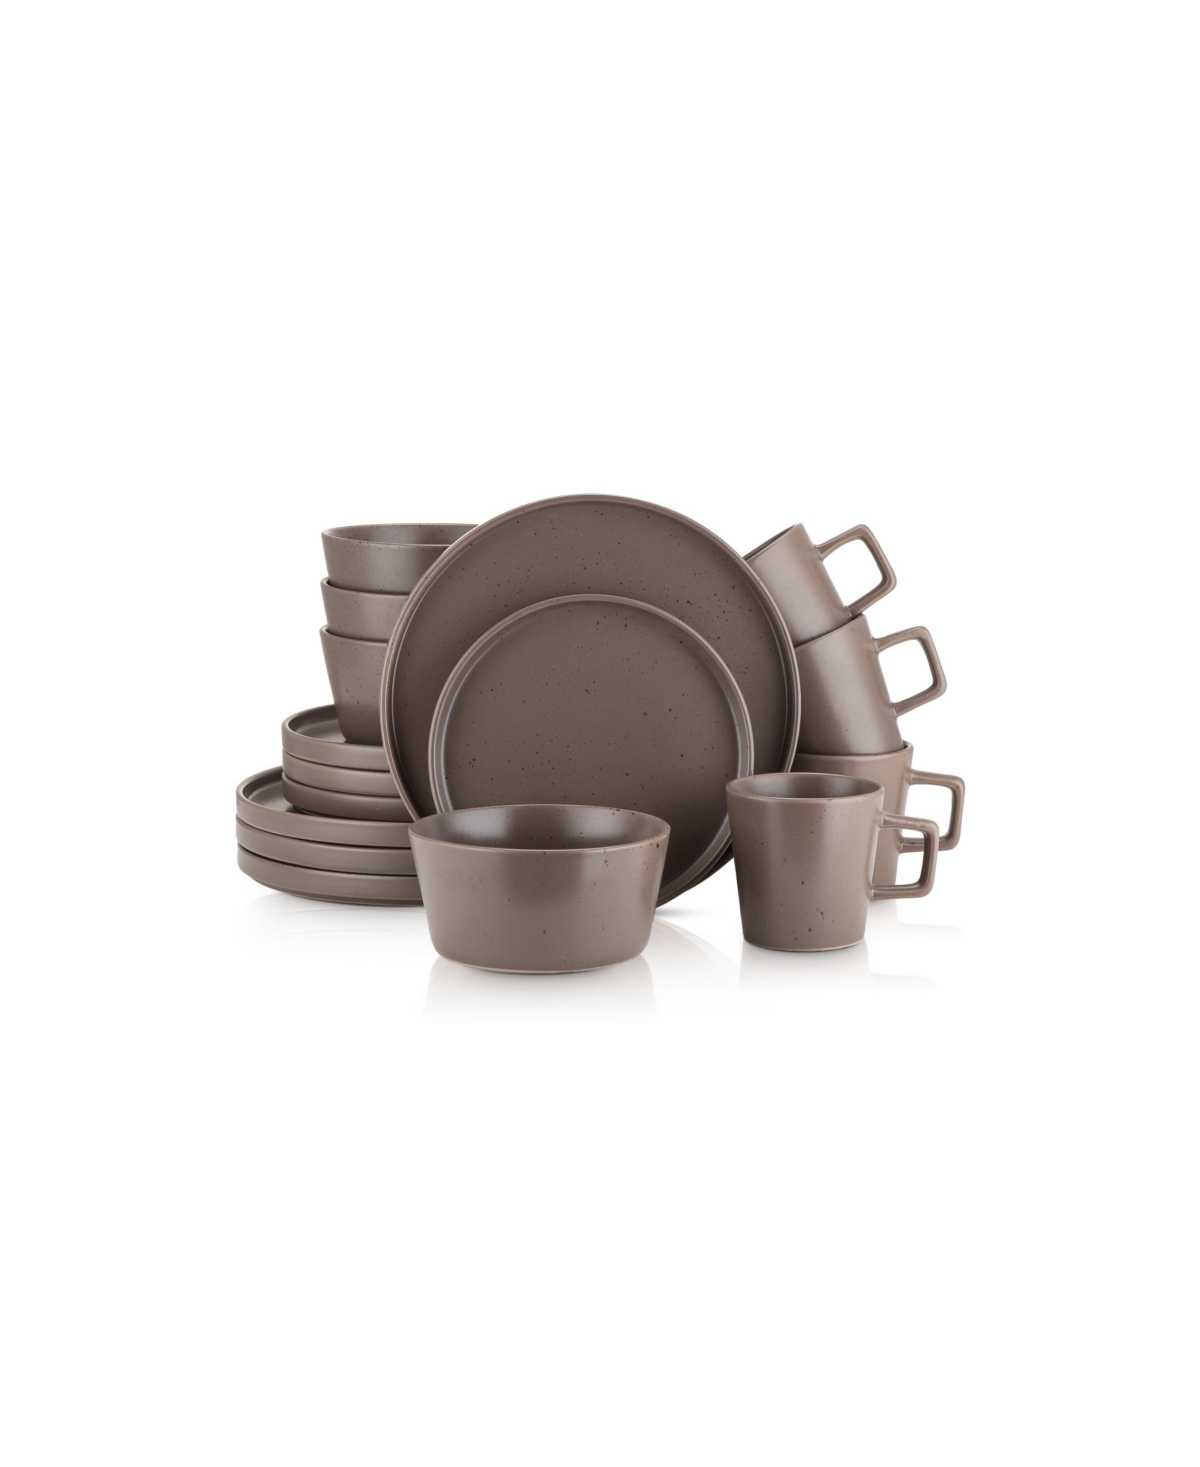 Celina 16 Pieces Dinnerware Set, Service For 4 - Brown Speckled